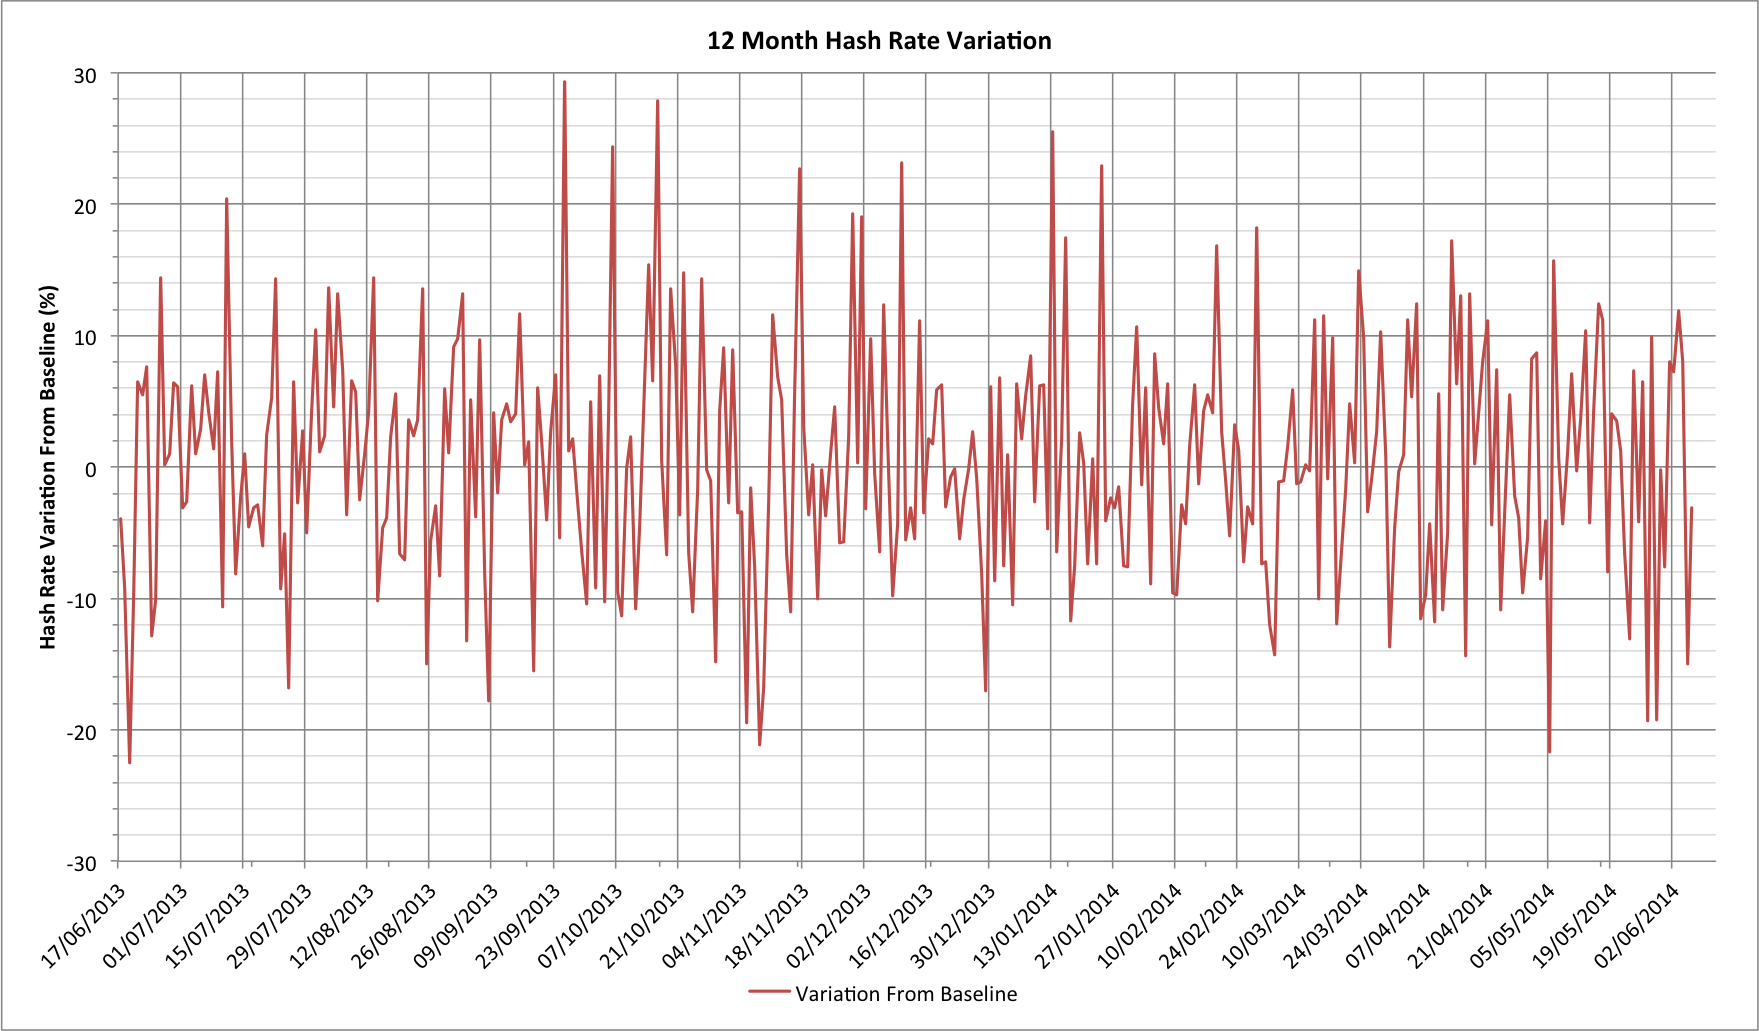 12 month Bitcoin hash rate variations (June 2014)